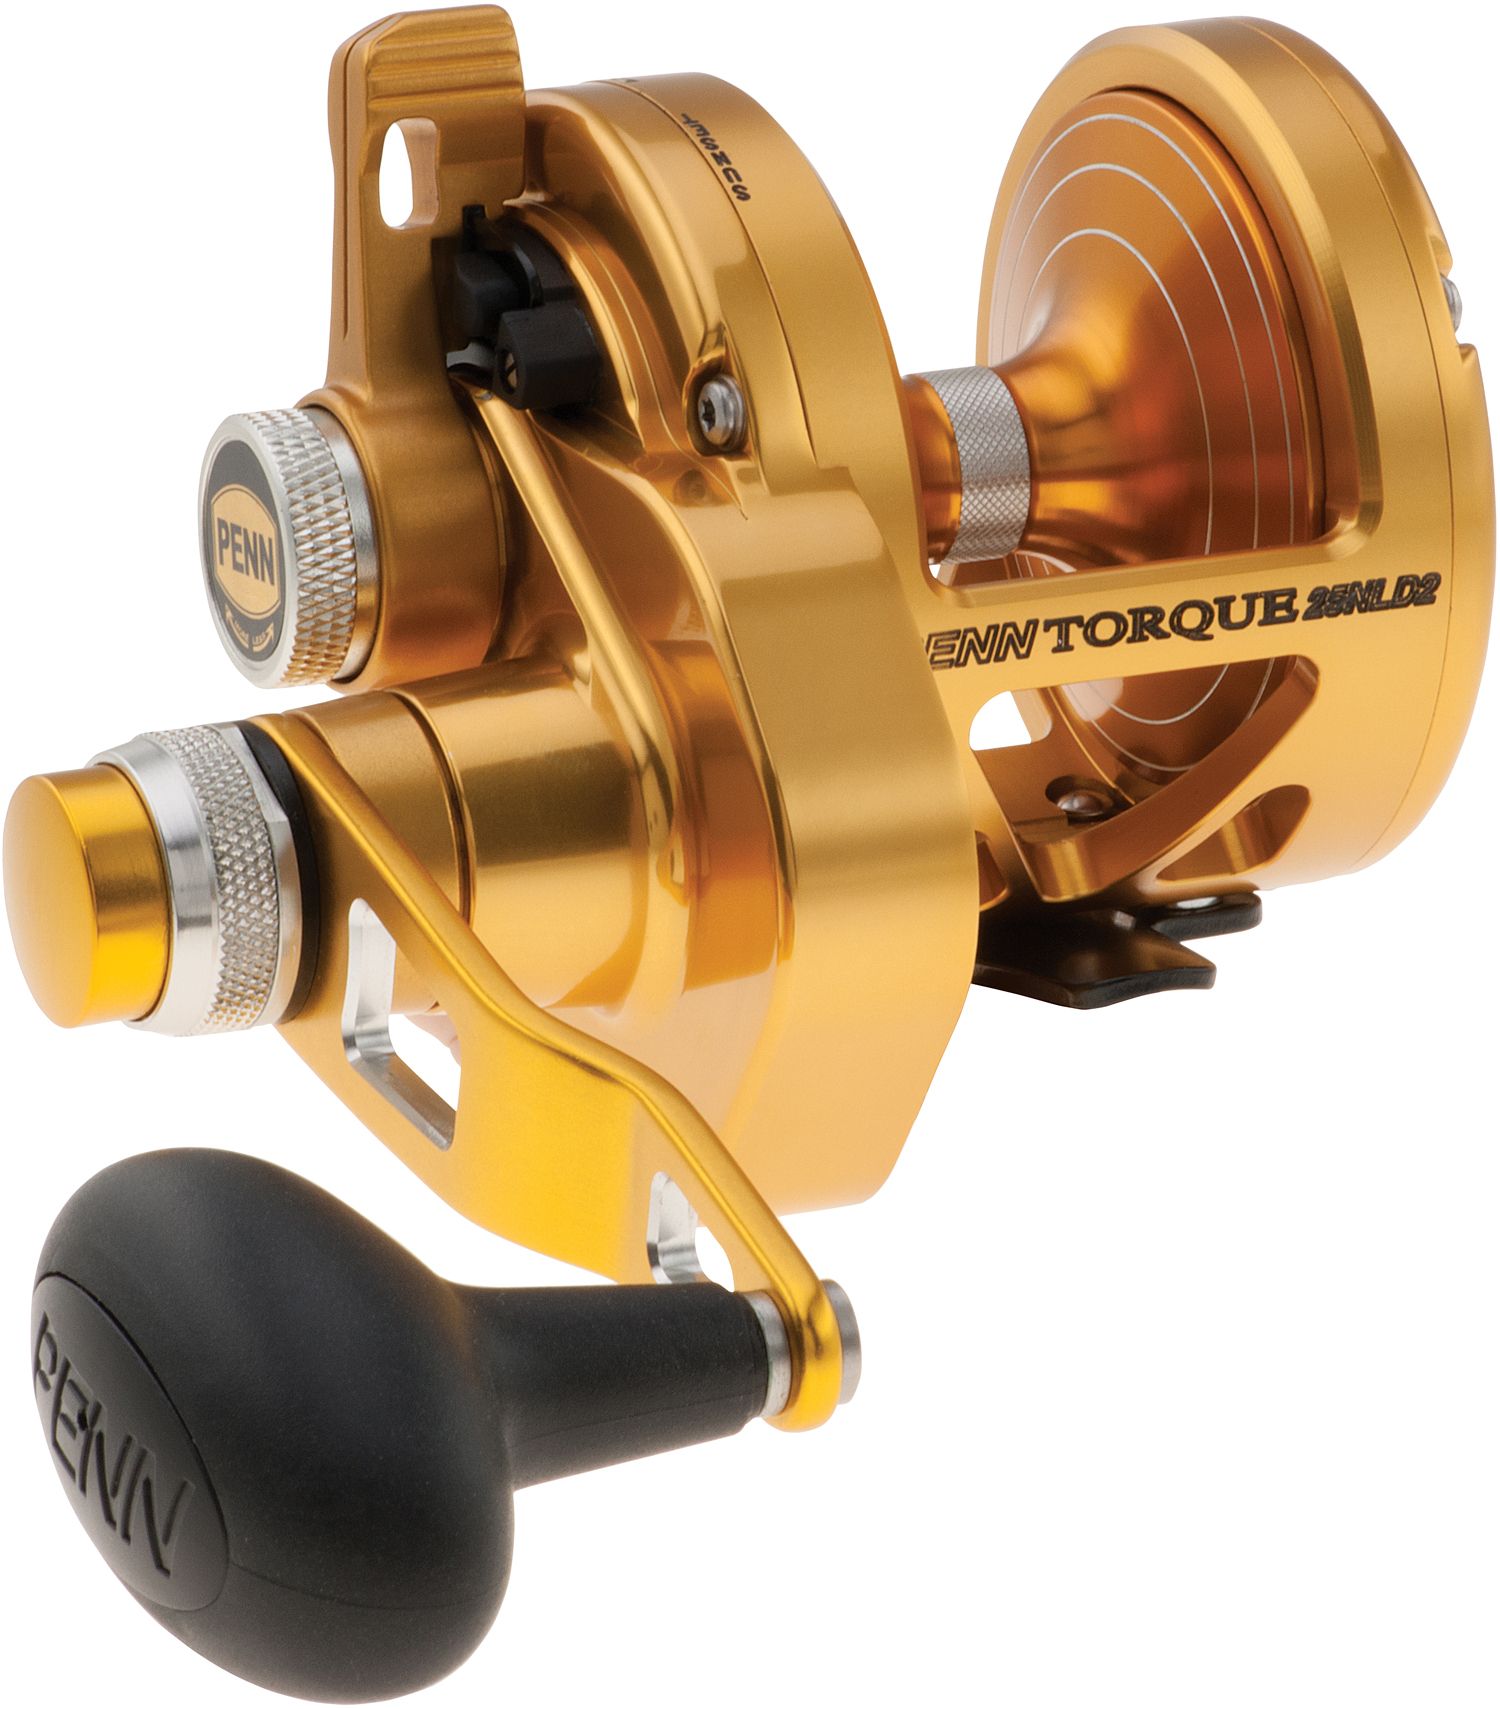 Photos - Other for Fishing PENN Torque 2-Speed Lever Drag Conventional Reels, Size 30, Gold 15PNFUPNN 